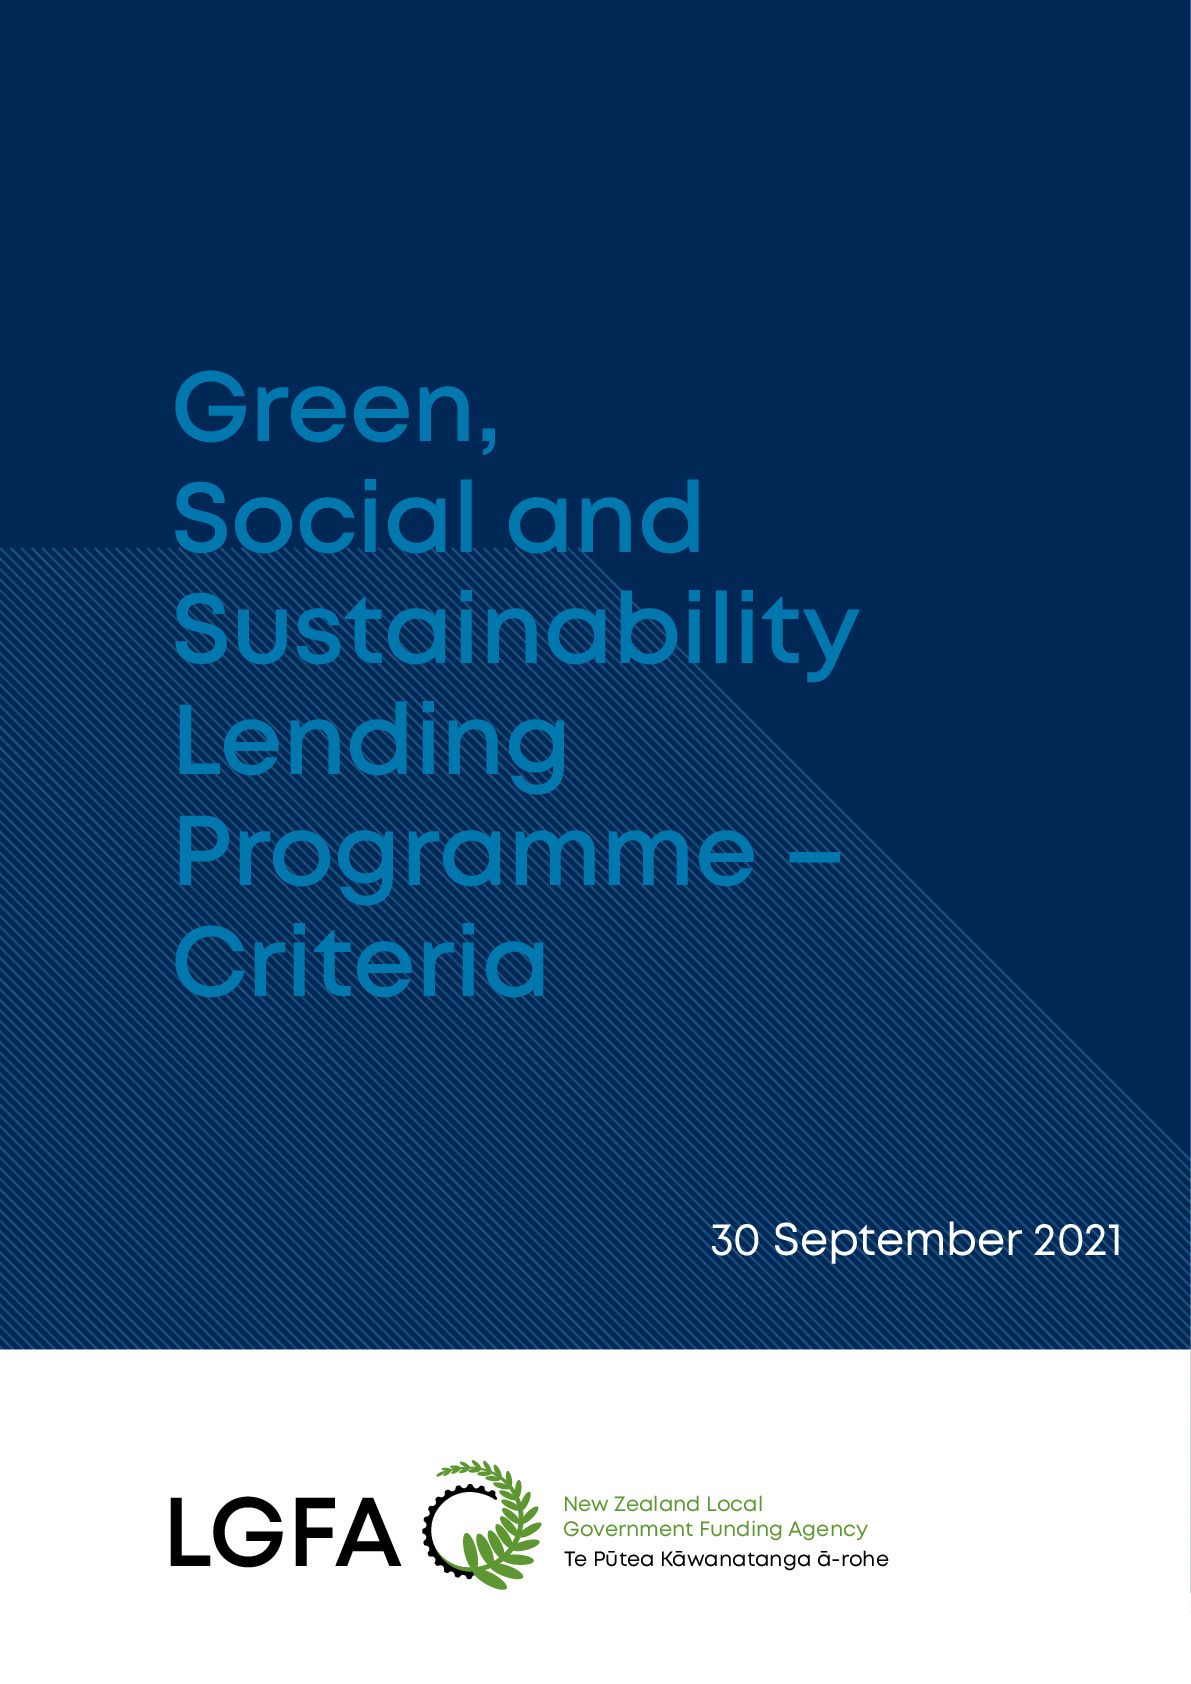 LGFA Green, Social and Sustainability Lending Programme - Criteria Final 30092021a